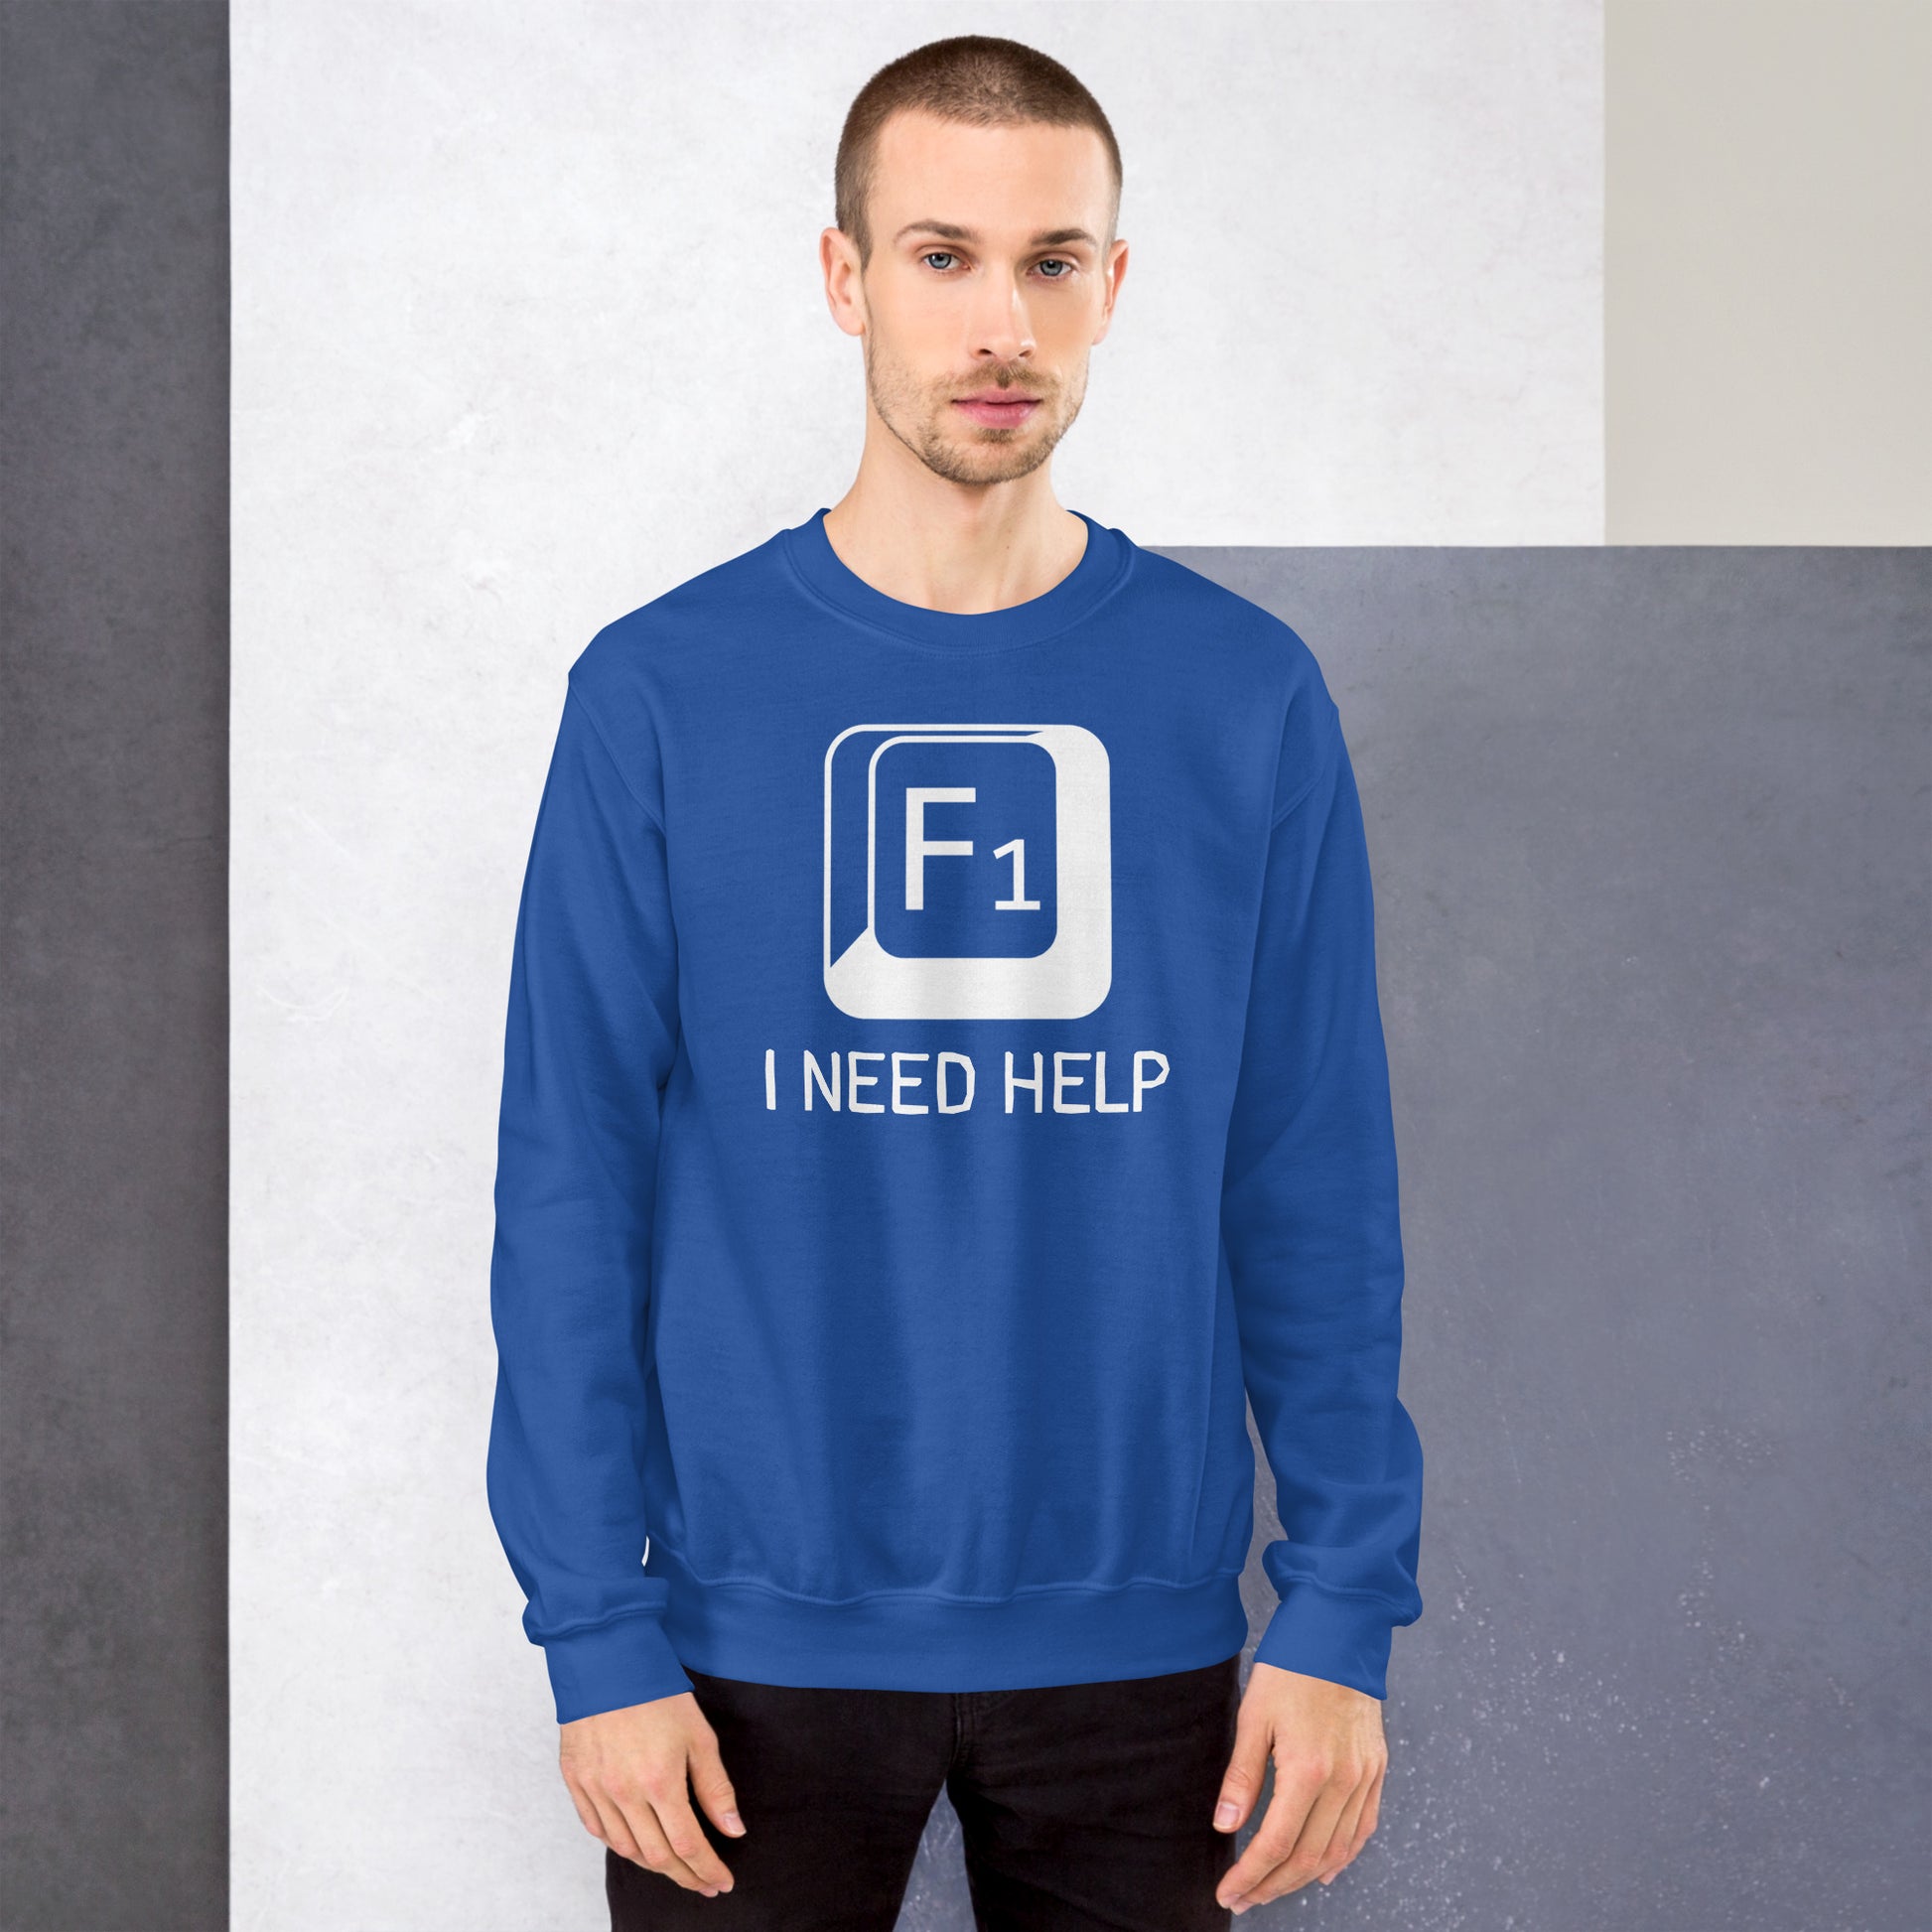 Men with royal blue sweatshirt and a picture of F1 key with text "I need help"